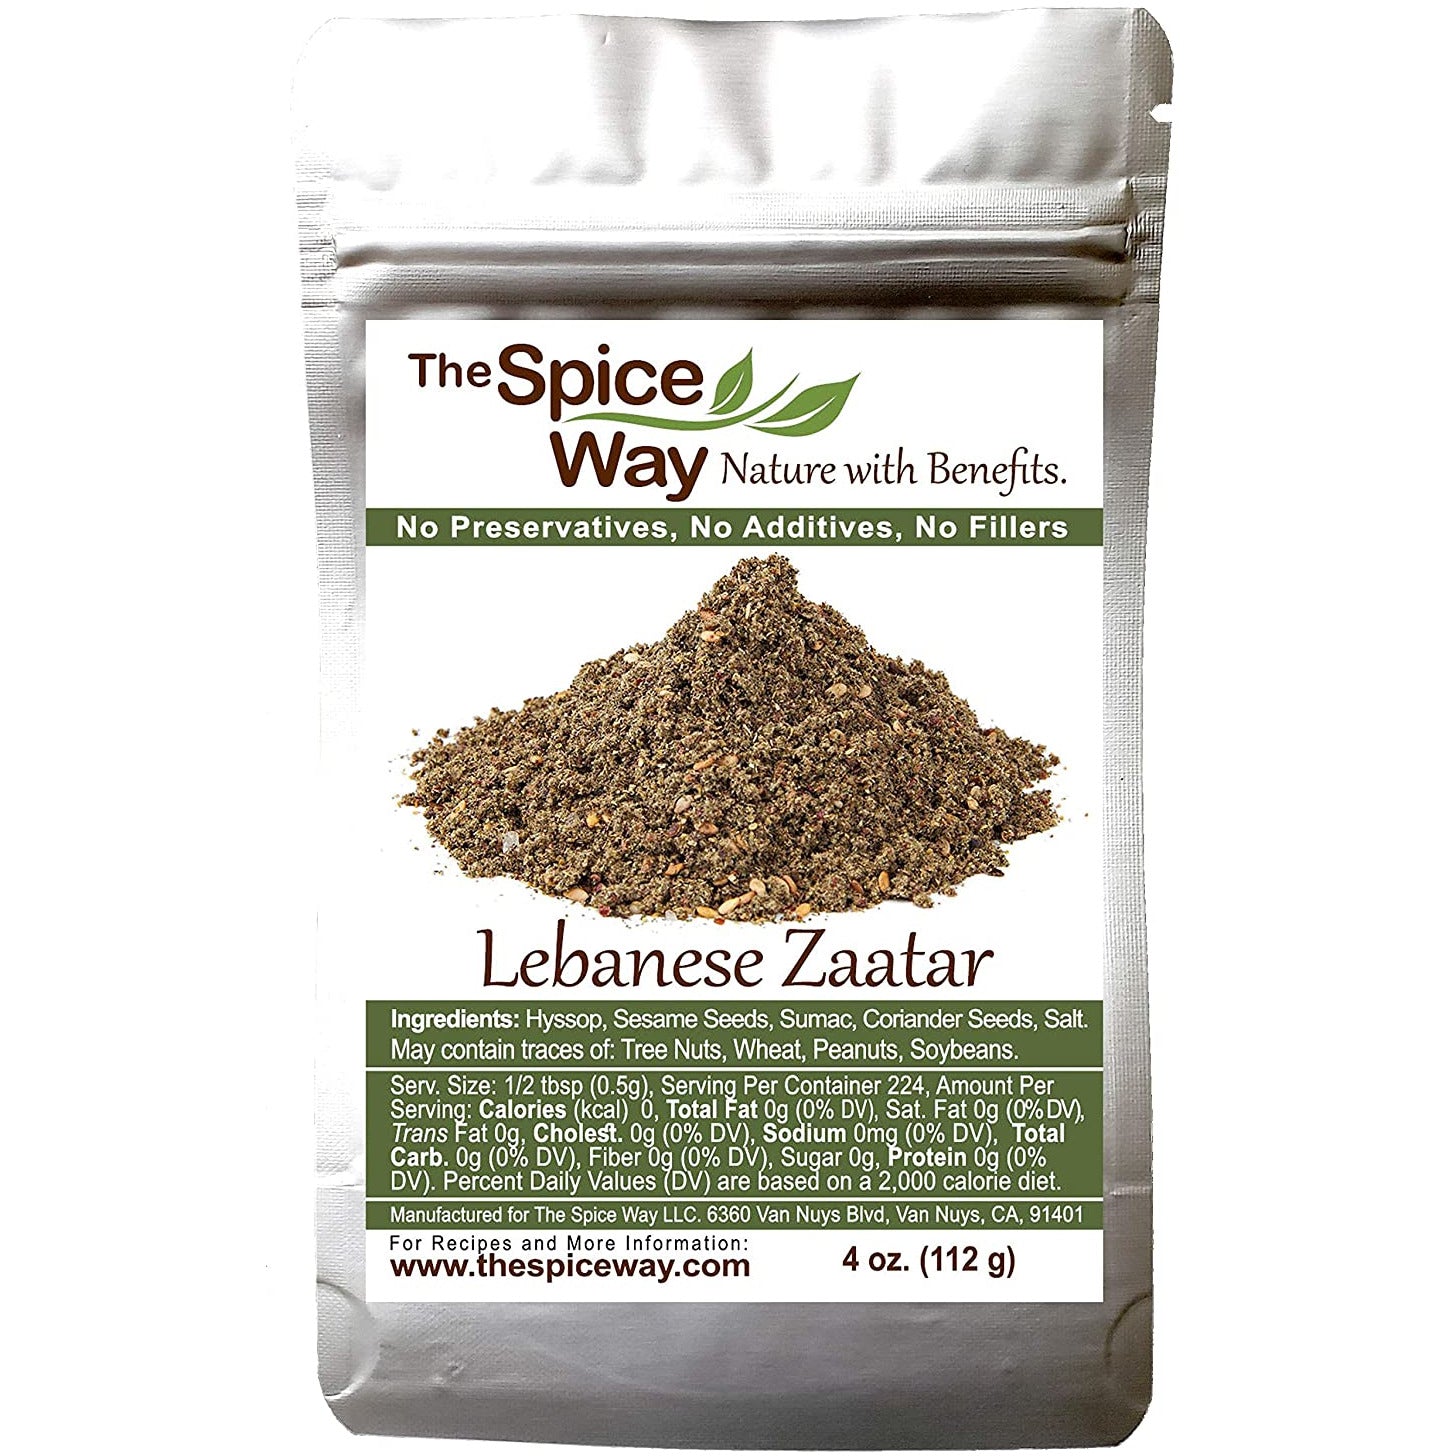 The Spice Way - Traditional Lebanese Zaatar with Hyssop | 4 oz | (No Thyme that is used as an hyssop substitute) Freshly Grown Seasoning. No Additives, No Perservatives (Za'atar/zatar/zahtar/zahatar)